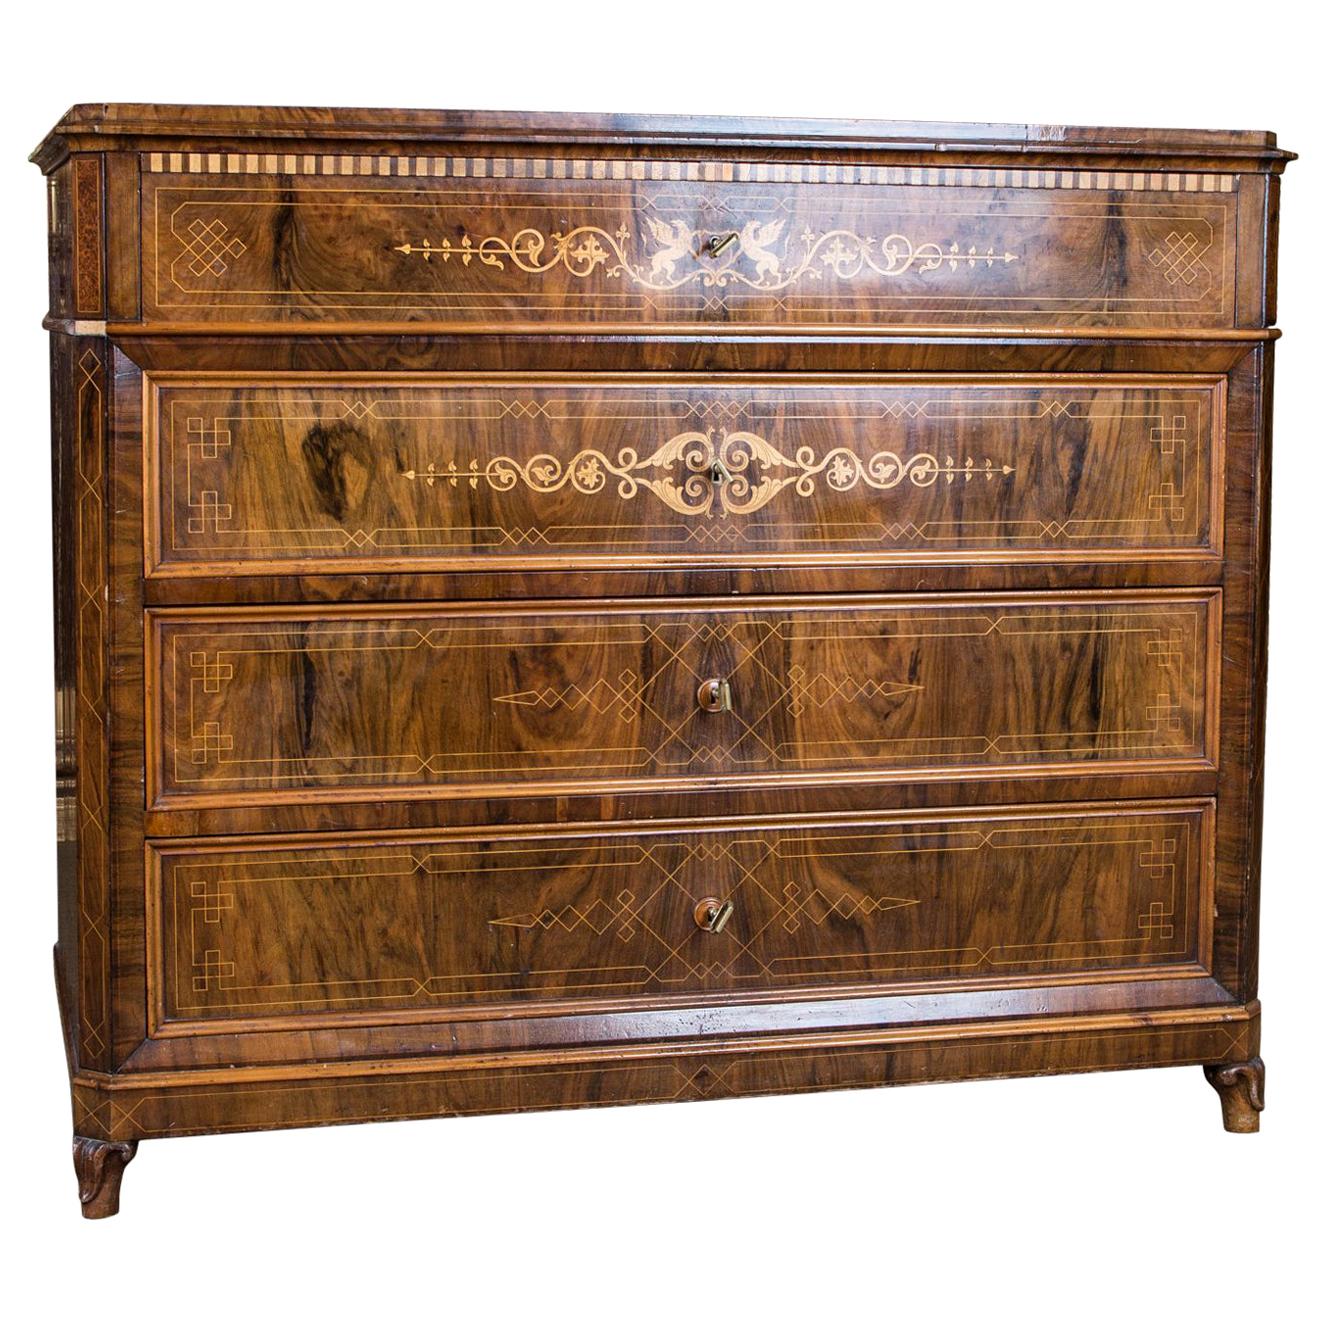 Biedermeier Writing Commode and Chest of Drawers circa 1850 with Fine Inlays